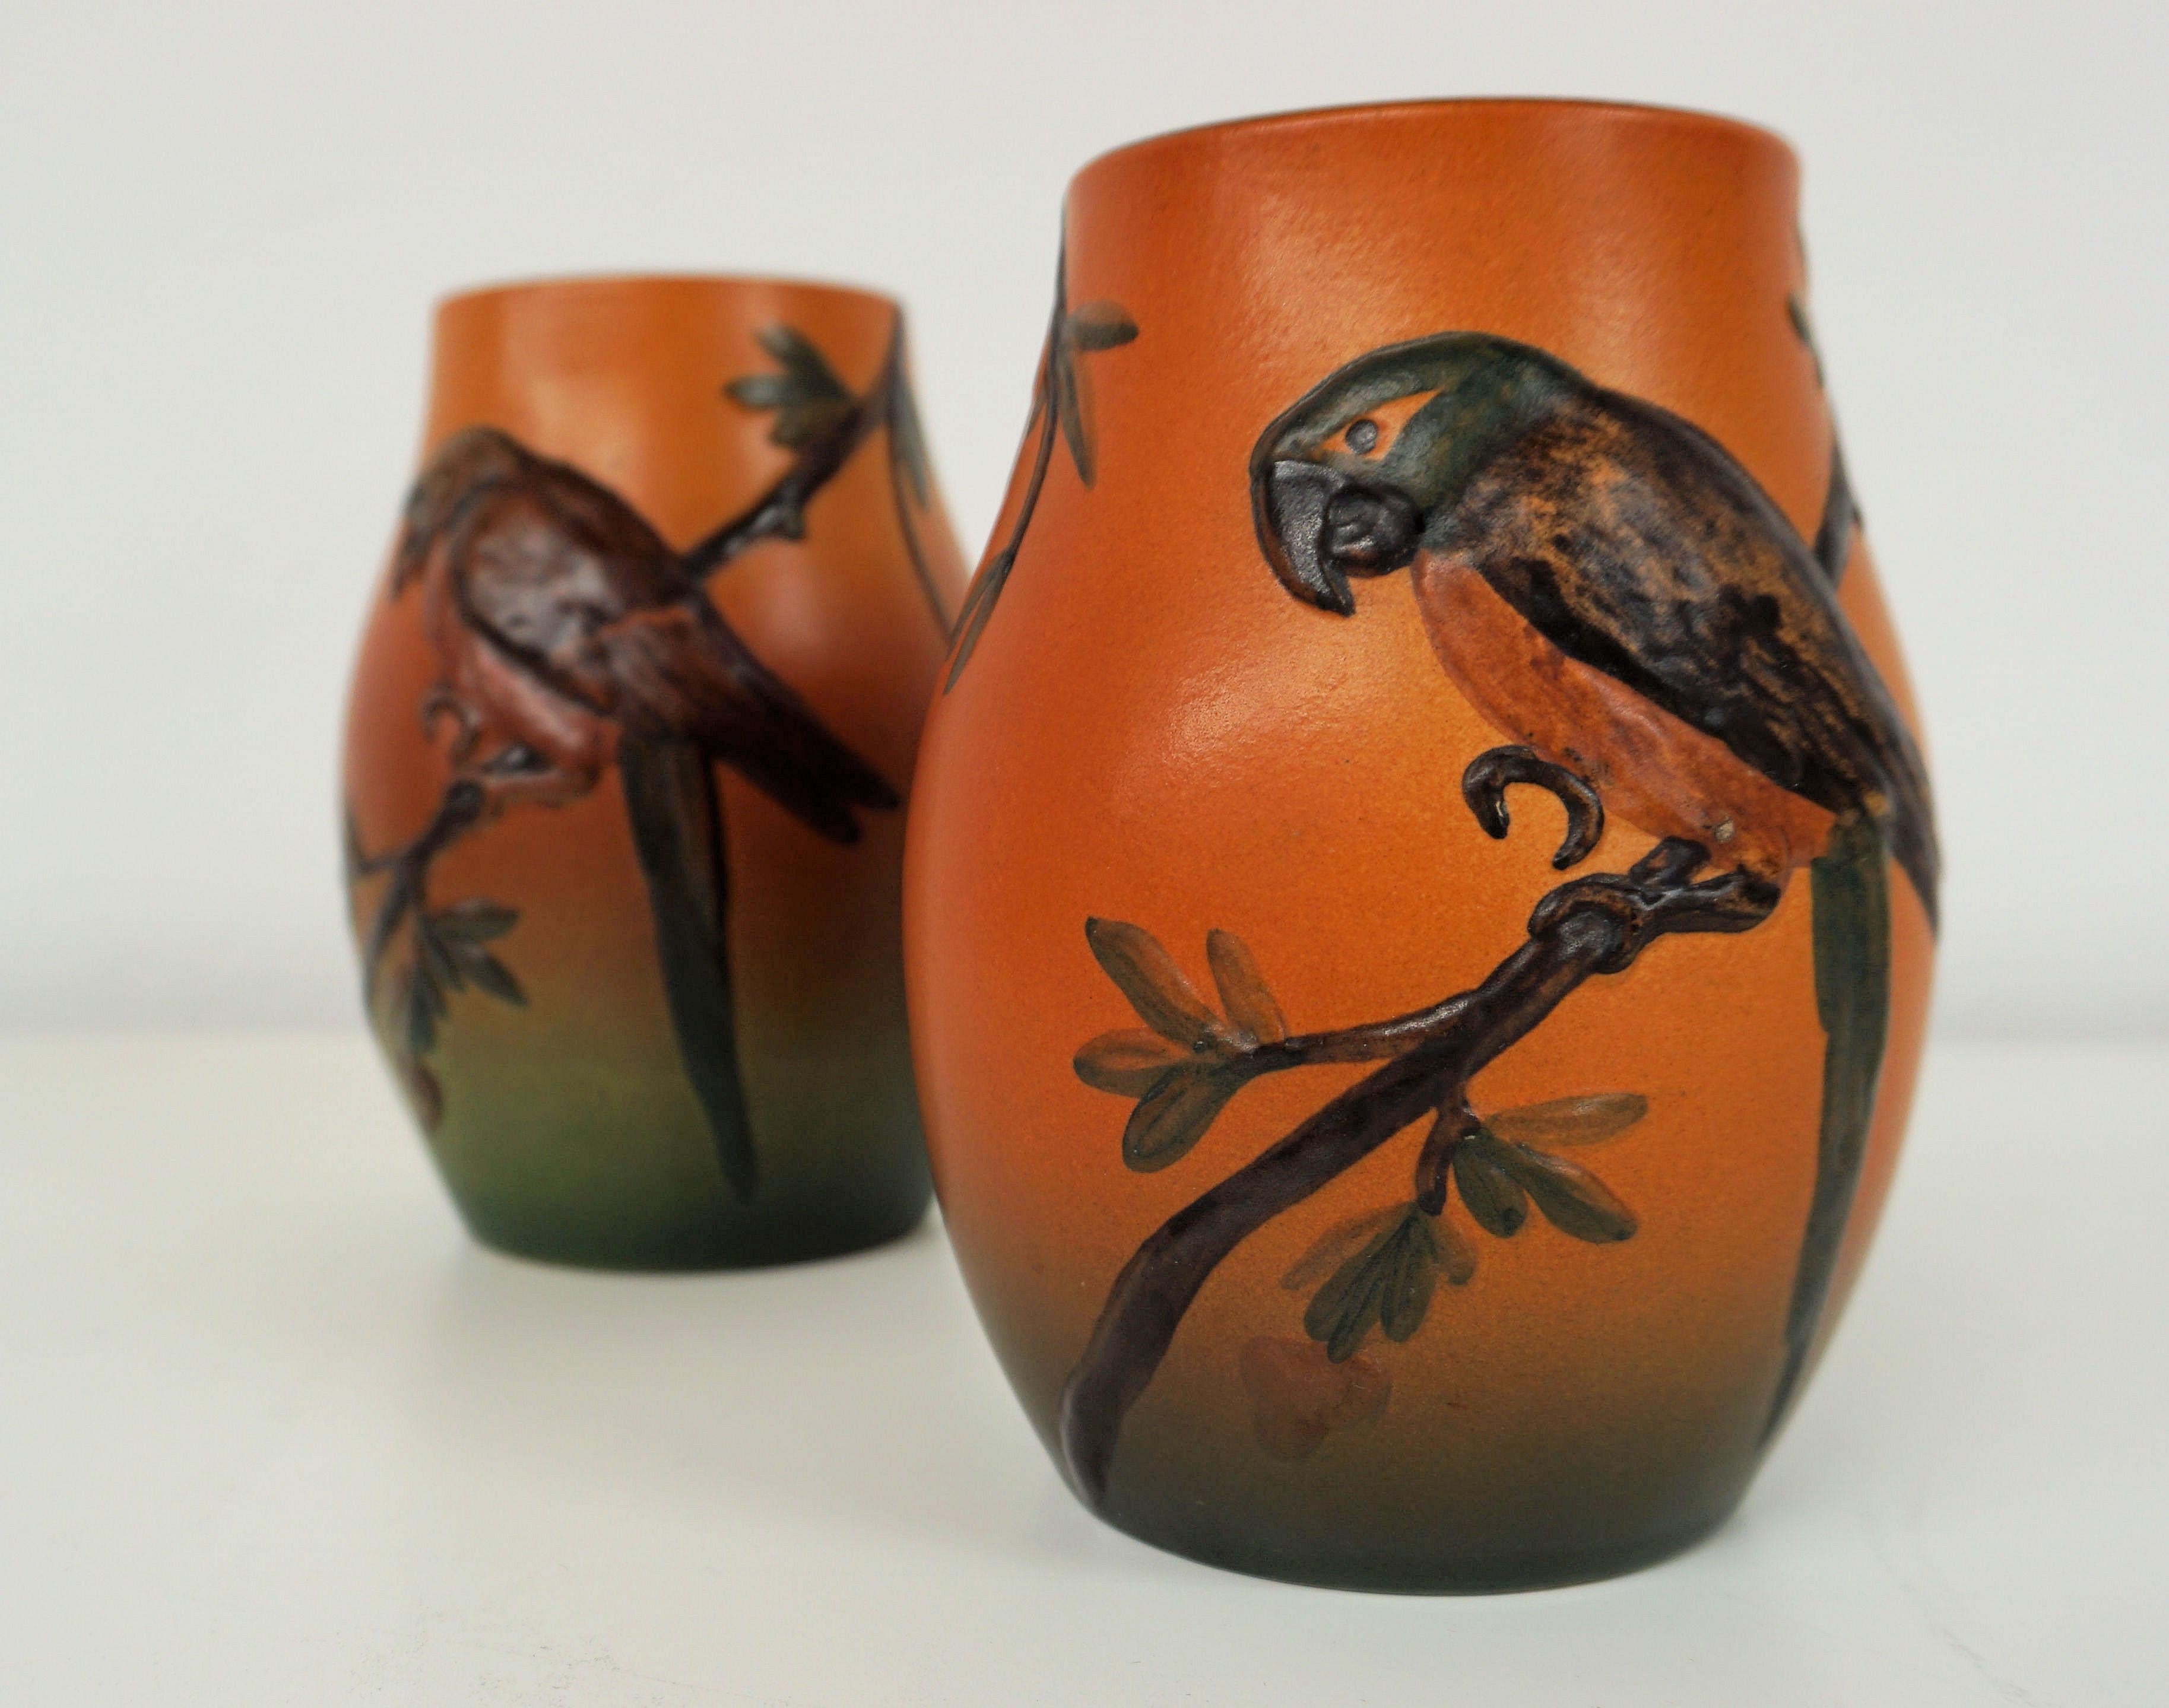 Hand-crafted Danish Art Nouveau flower decorated vases by West in 1927 for P. Ipsens Enke

The art nouveau vases feature very well made lively parrot with branches and leafs are in very good condition.

P. Ipsens Enke (1843 - 1955) was a very